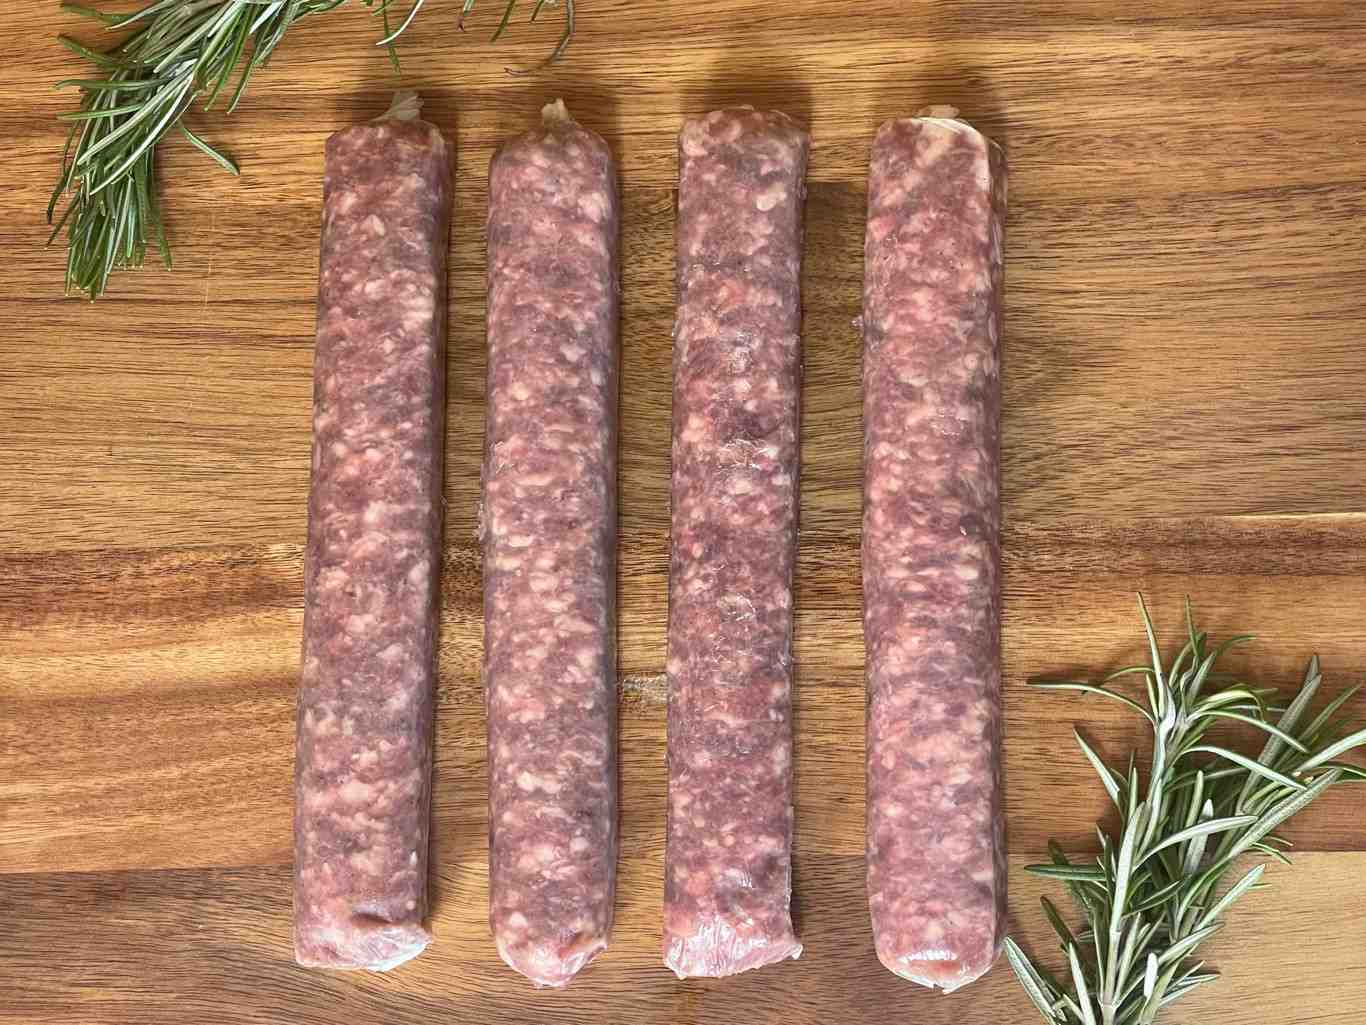 What's the difference between kielbasa and bratwurst?